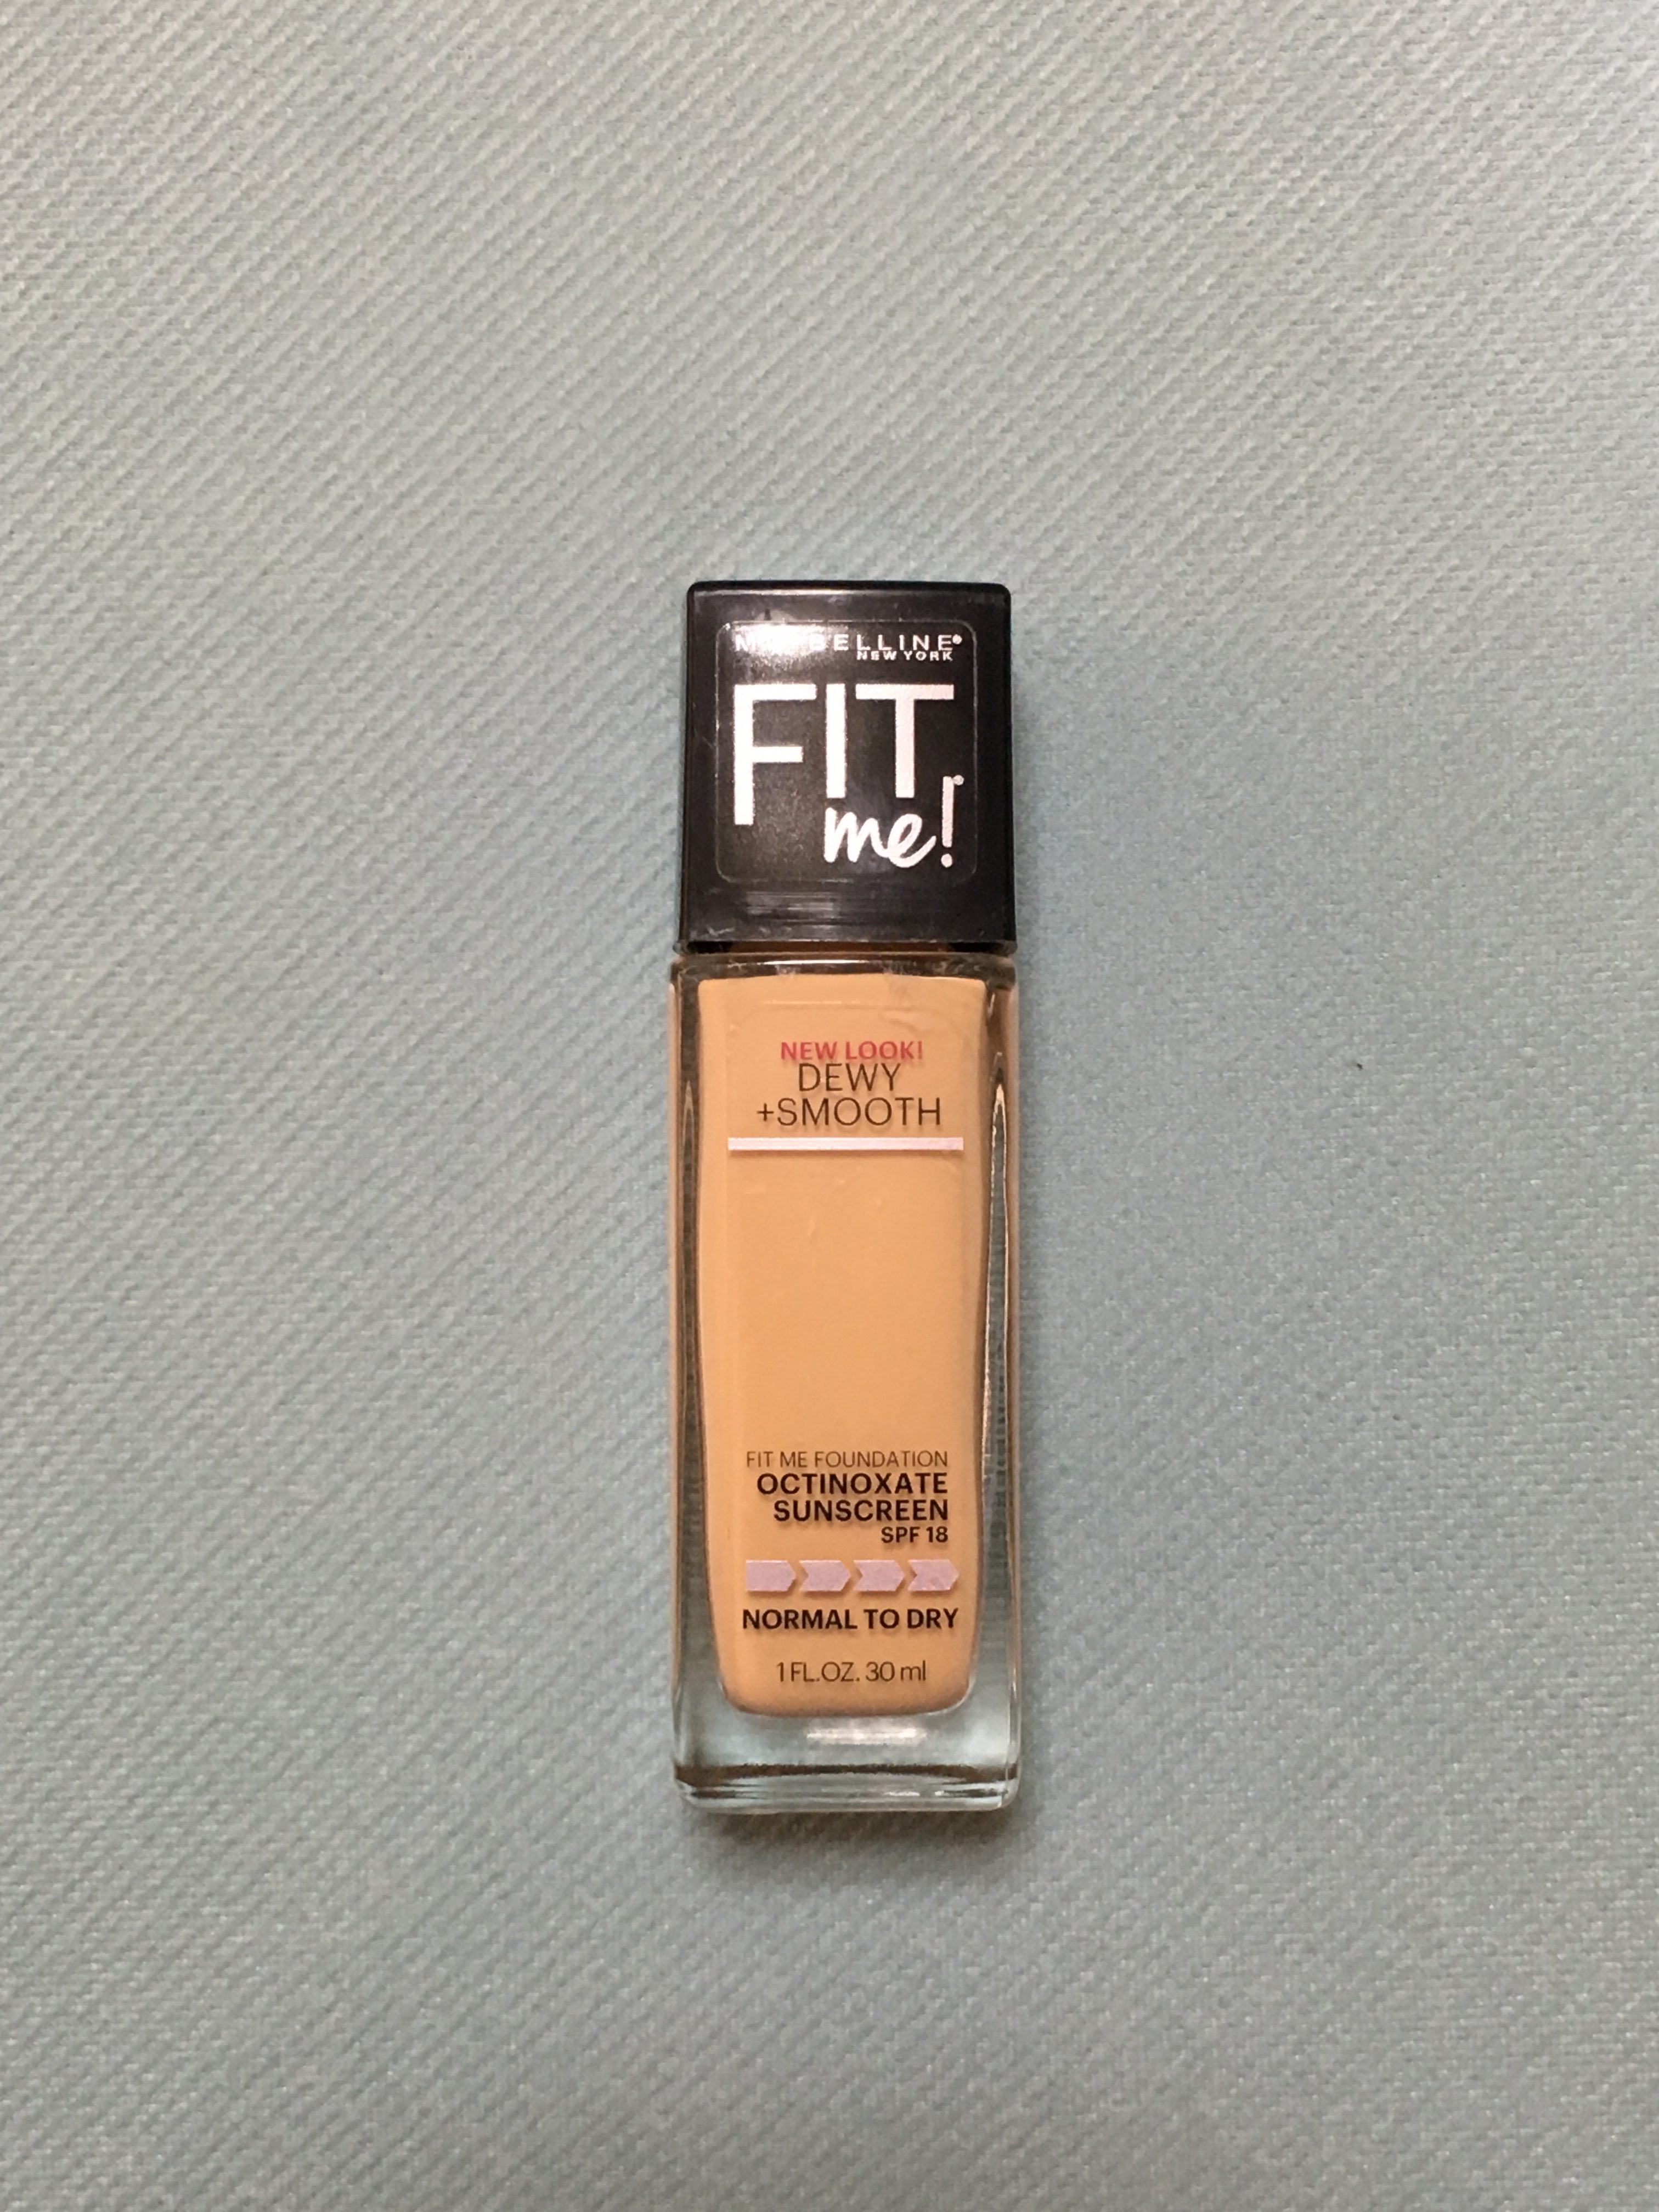 GET-THE-LOOK-FOUNDATION-1